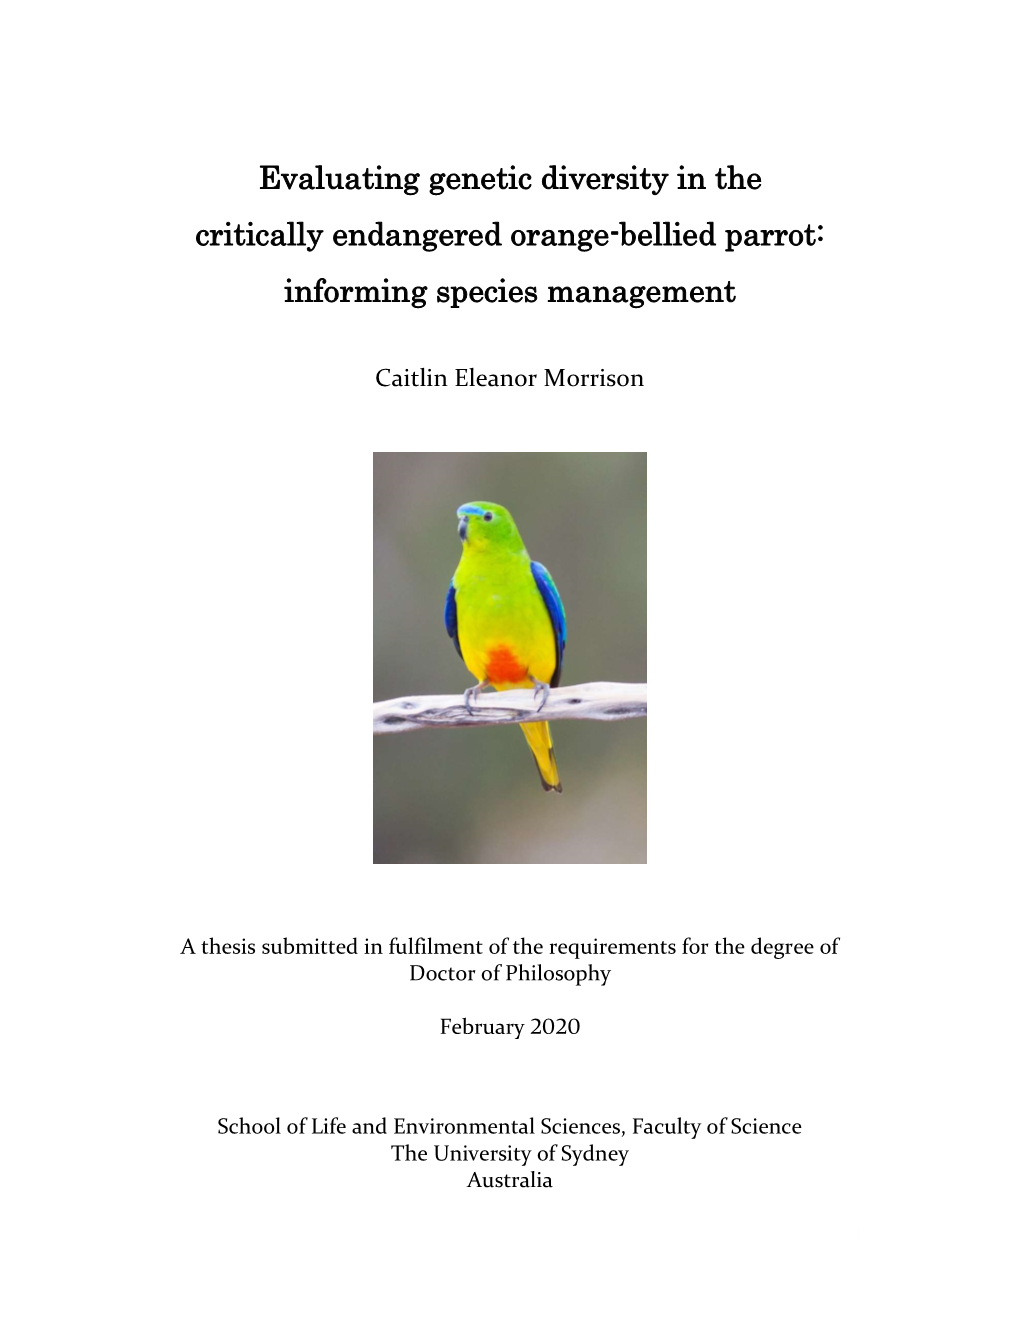 Evaluating Genetic Diversity in the Critically Endangered Orange-Bellied Parrot: Informing Species Management